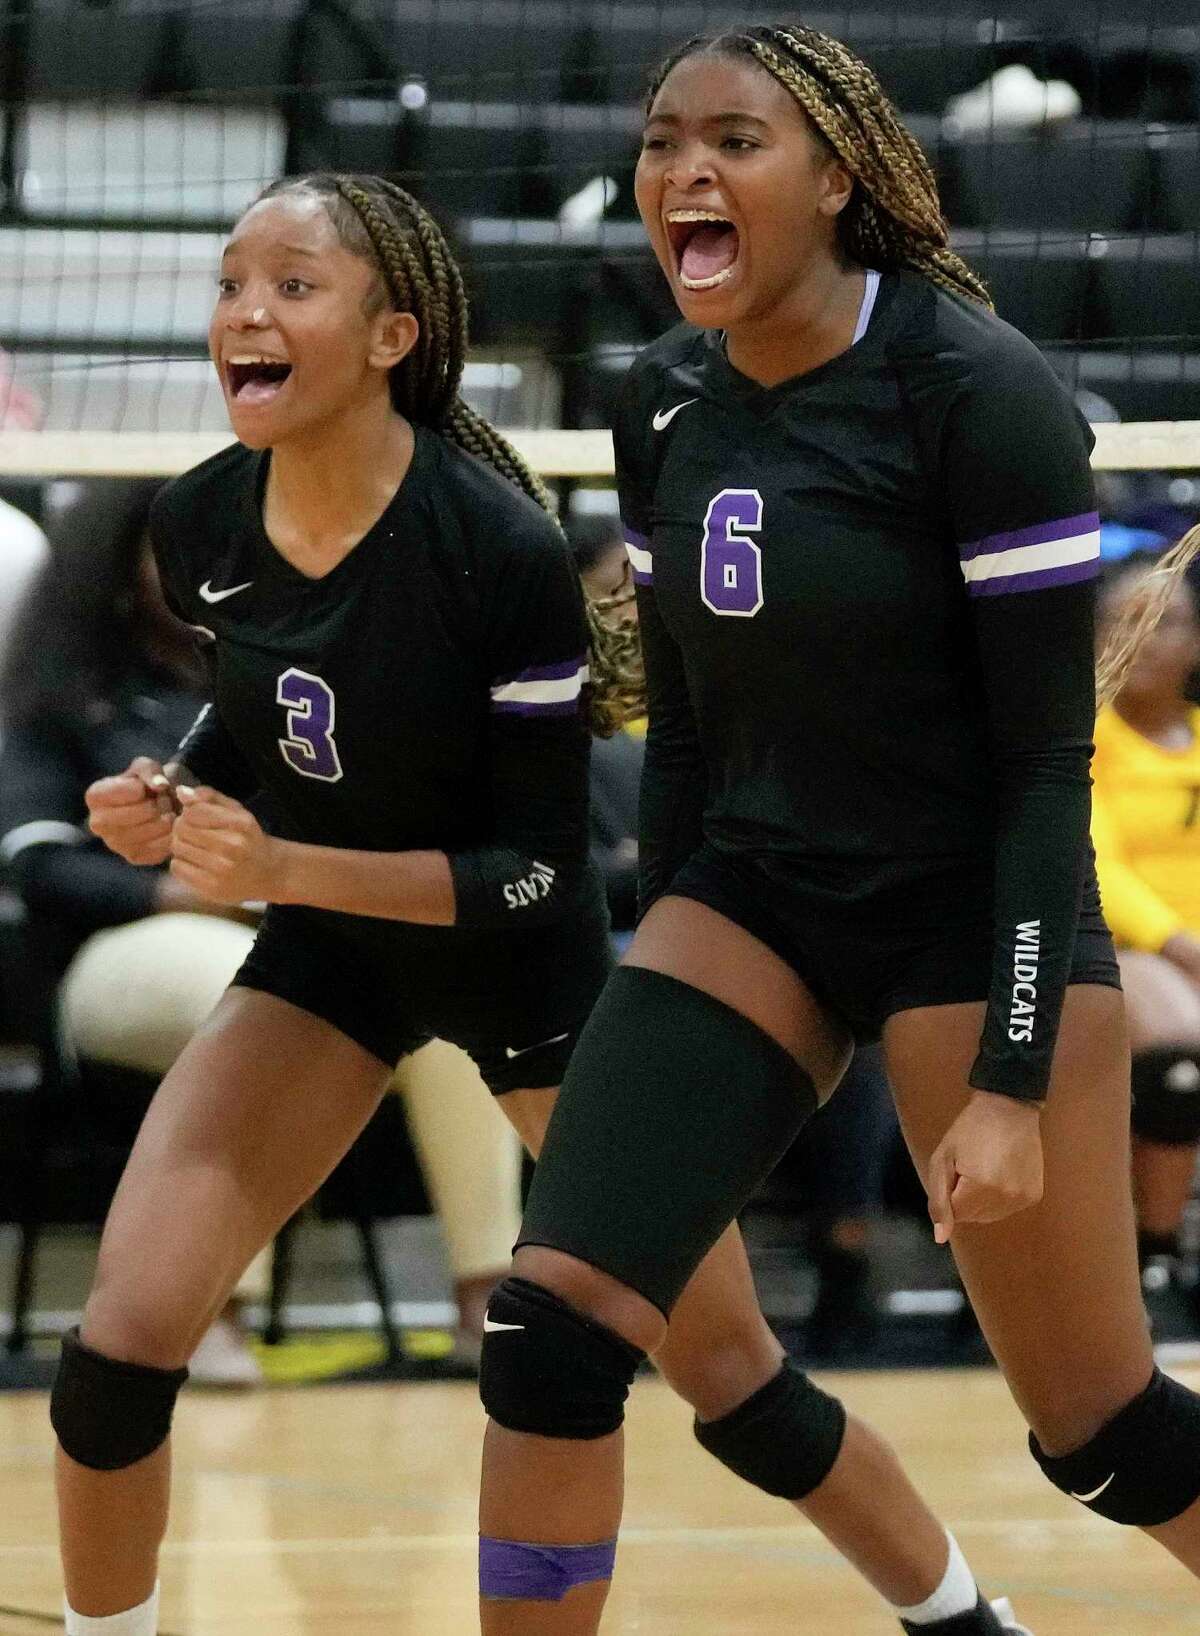 Humble's Jada James (6) celebrates her point with Trabrece Marbley during a high school volleyball match against Eisenhower, Tuesday, Aug. 23, 2022, in Houston.